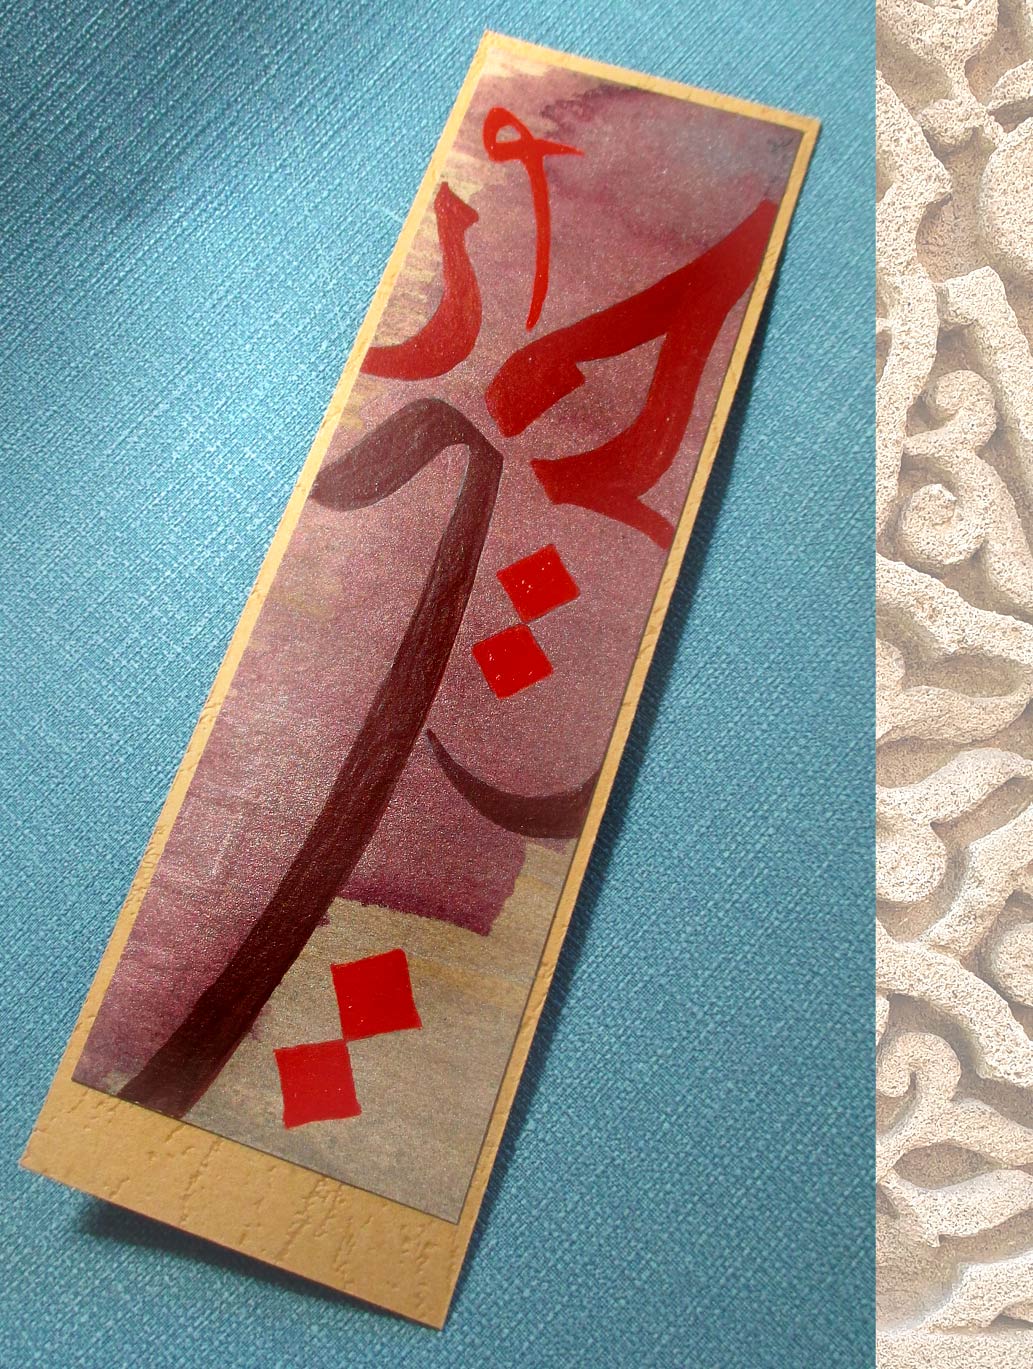  Bookmark - Arabic Calligraphy Water colors on paper